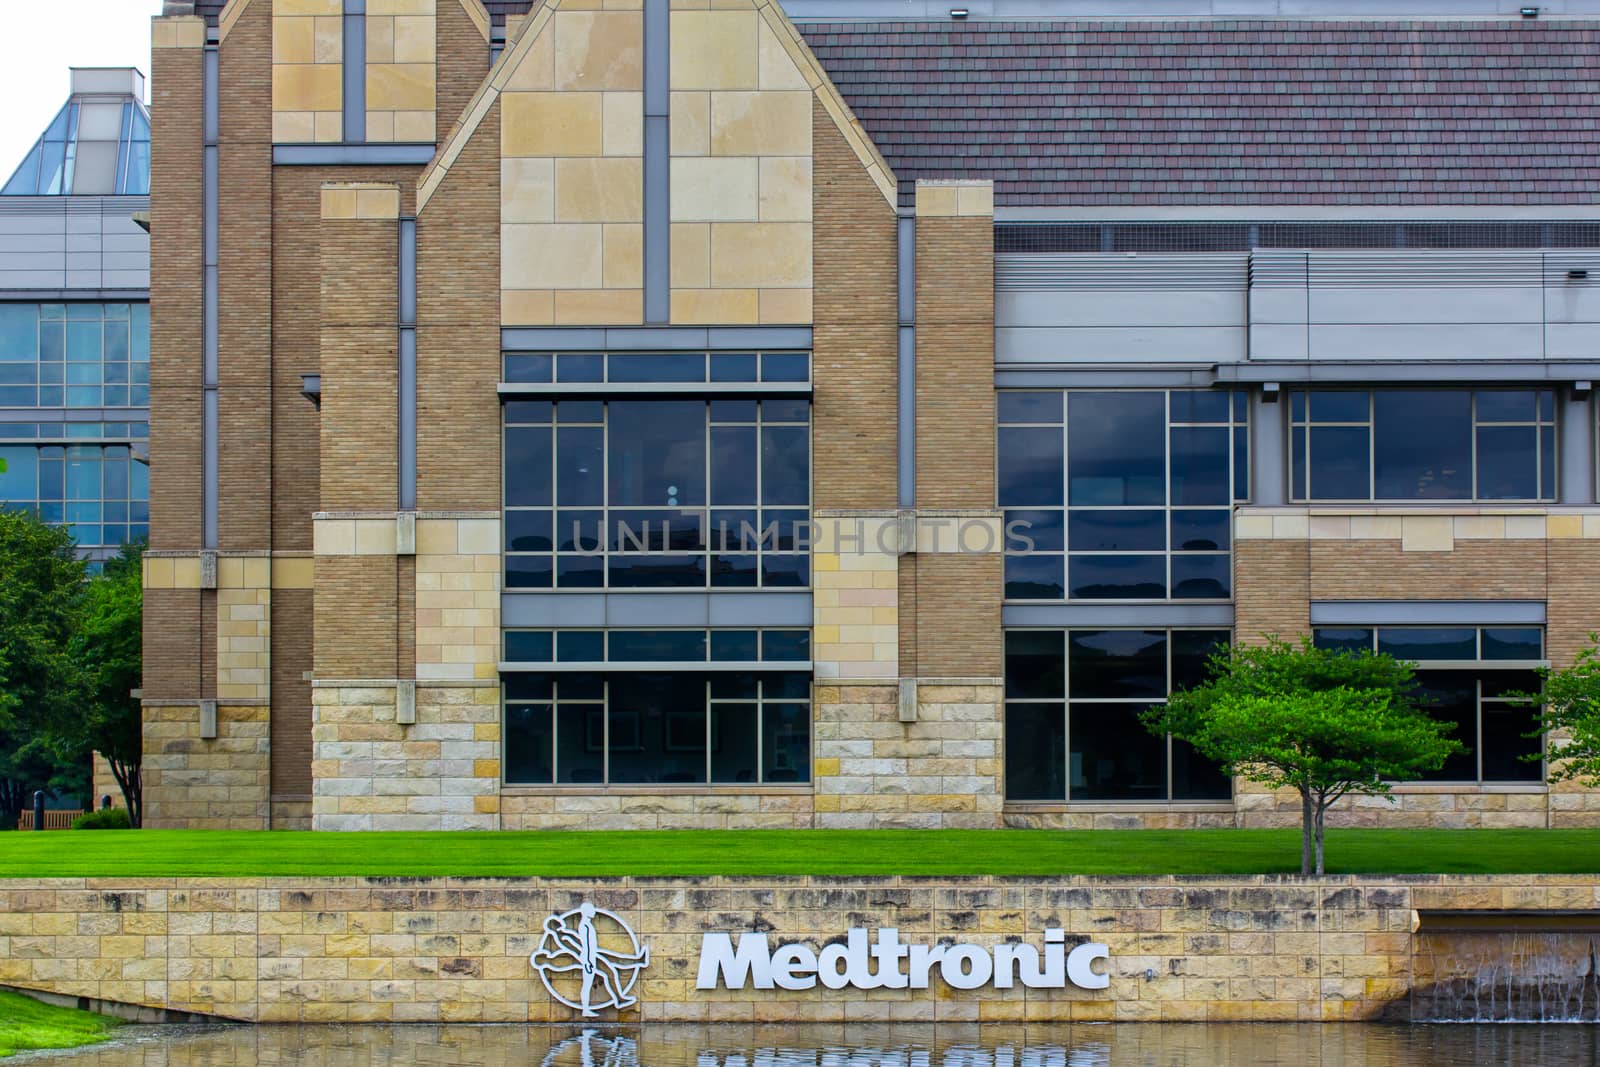 Medtronic Corporate Headquarters Campus by wolterk